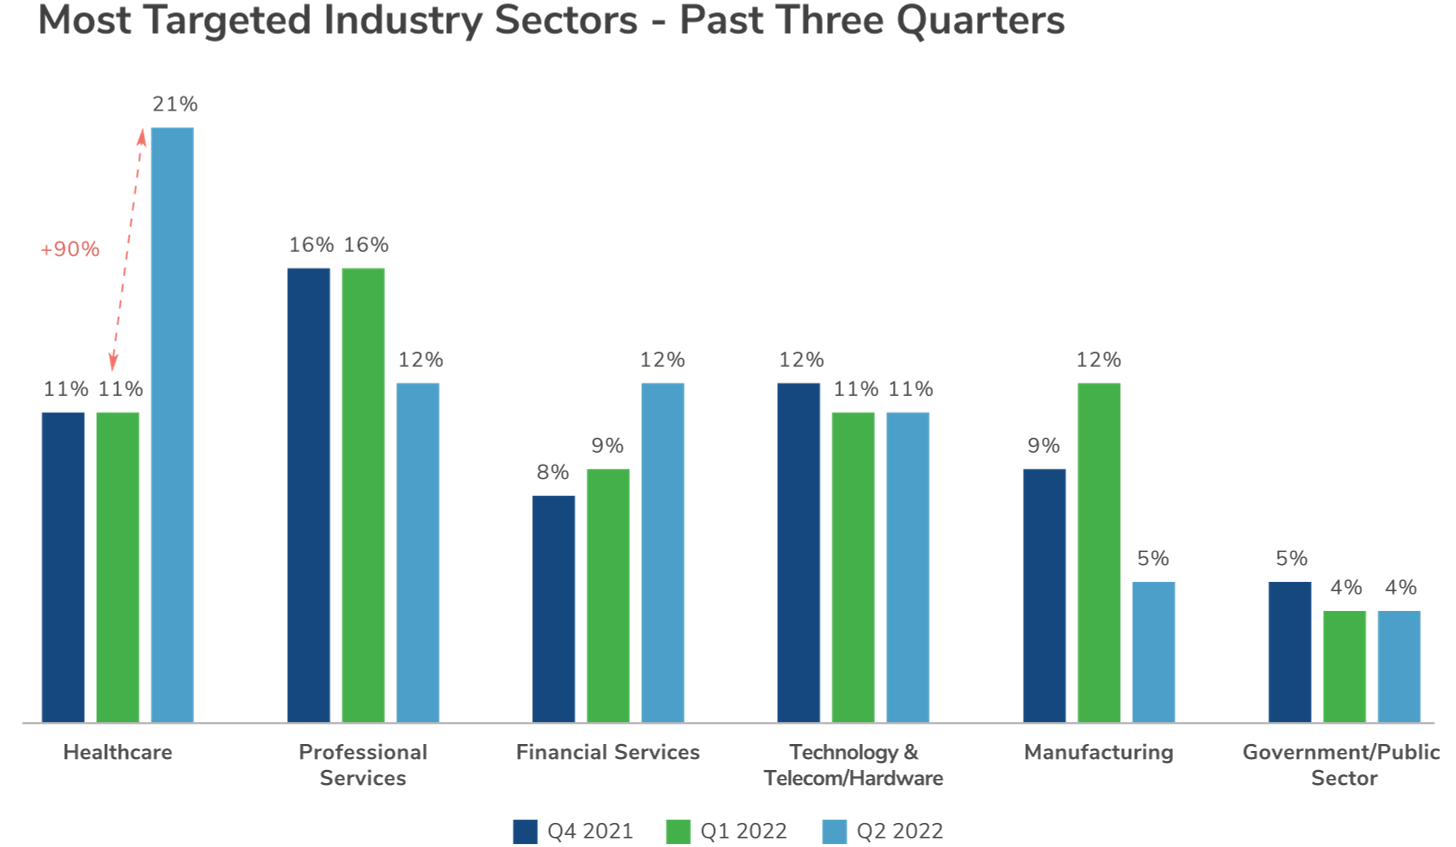 Most Targeted Sectors - Past Three Quarters